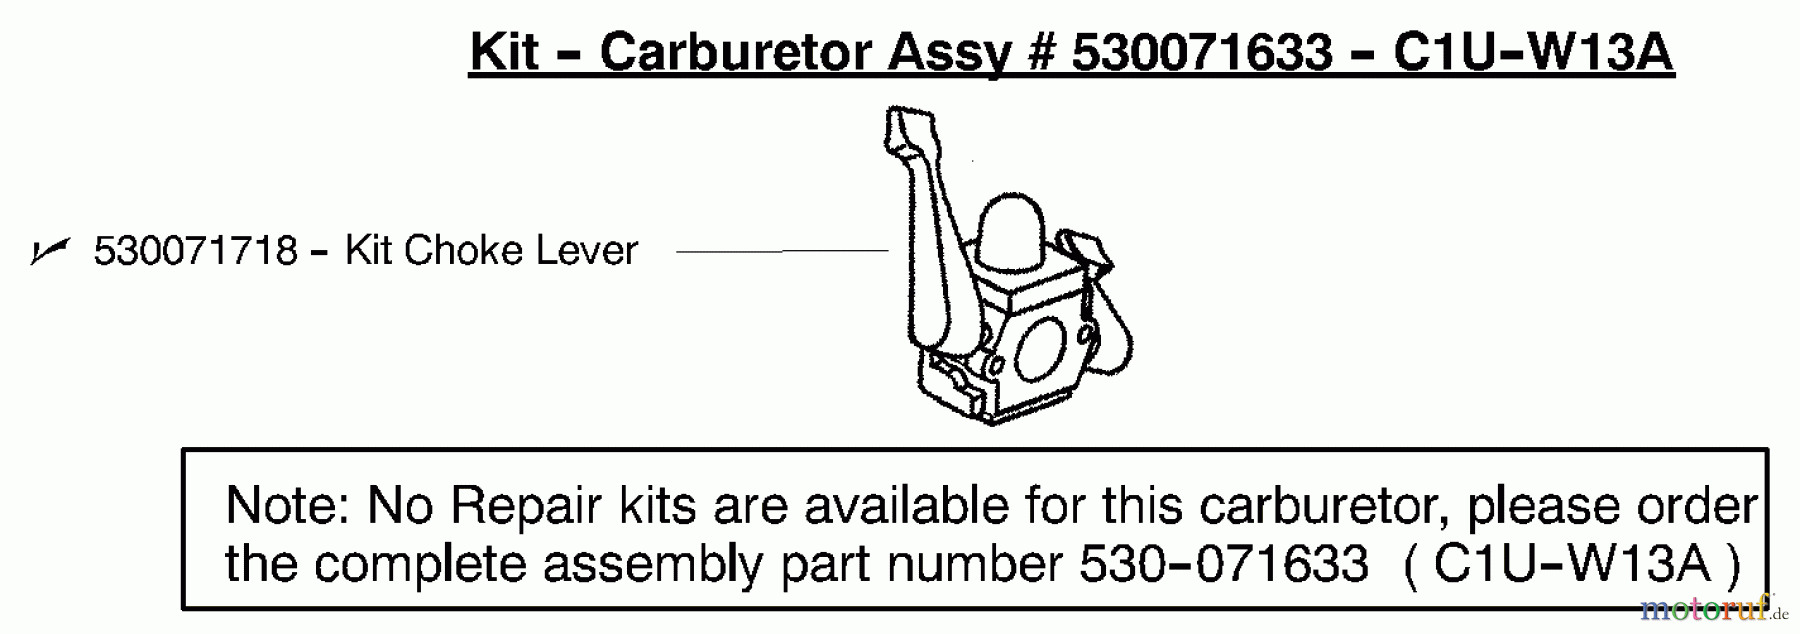  Poulan / Weed Eater Heckenscheren GHT180LE (Type 4) - Weed Eater Hedge Trimmer Carburetor Assembly (C1U-W13A) PN 530071633